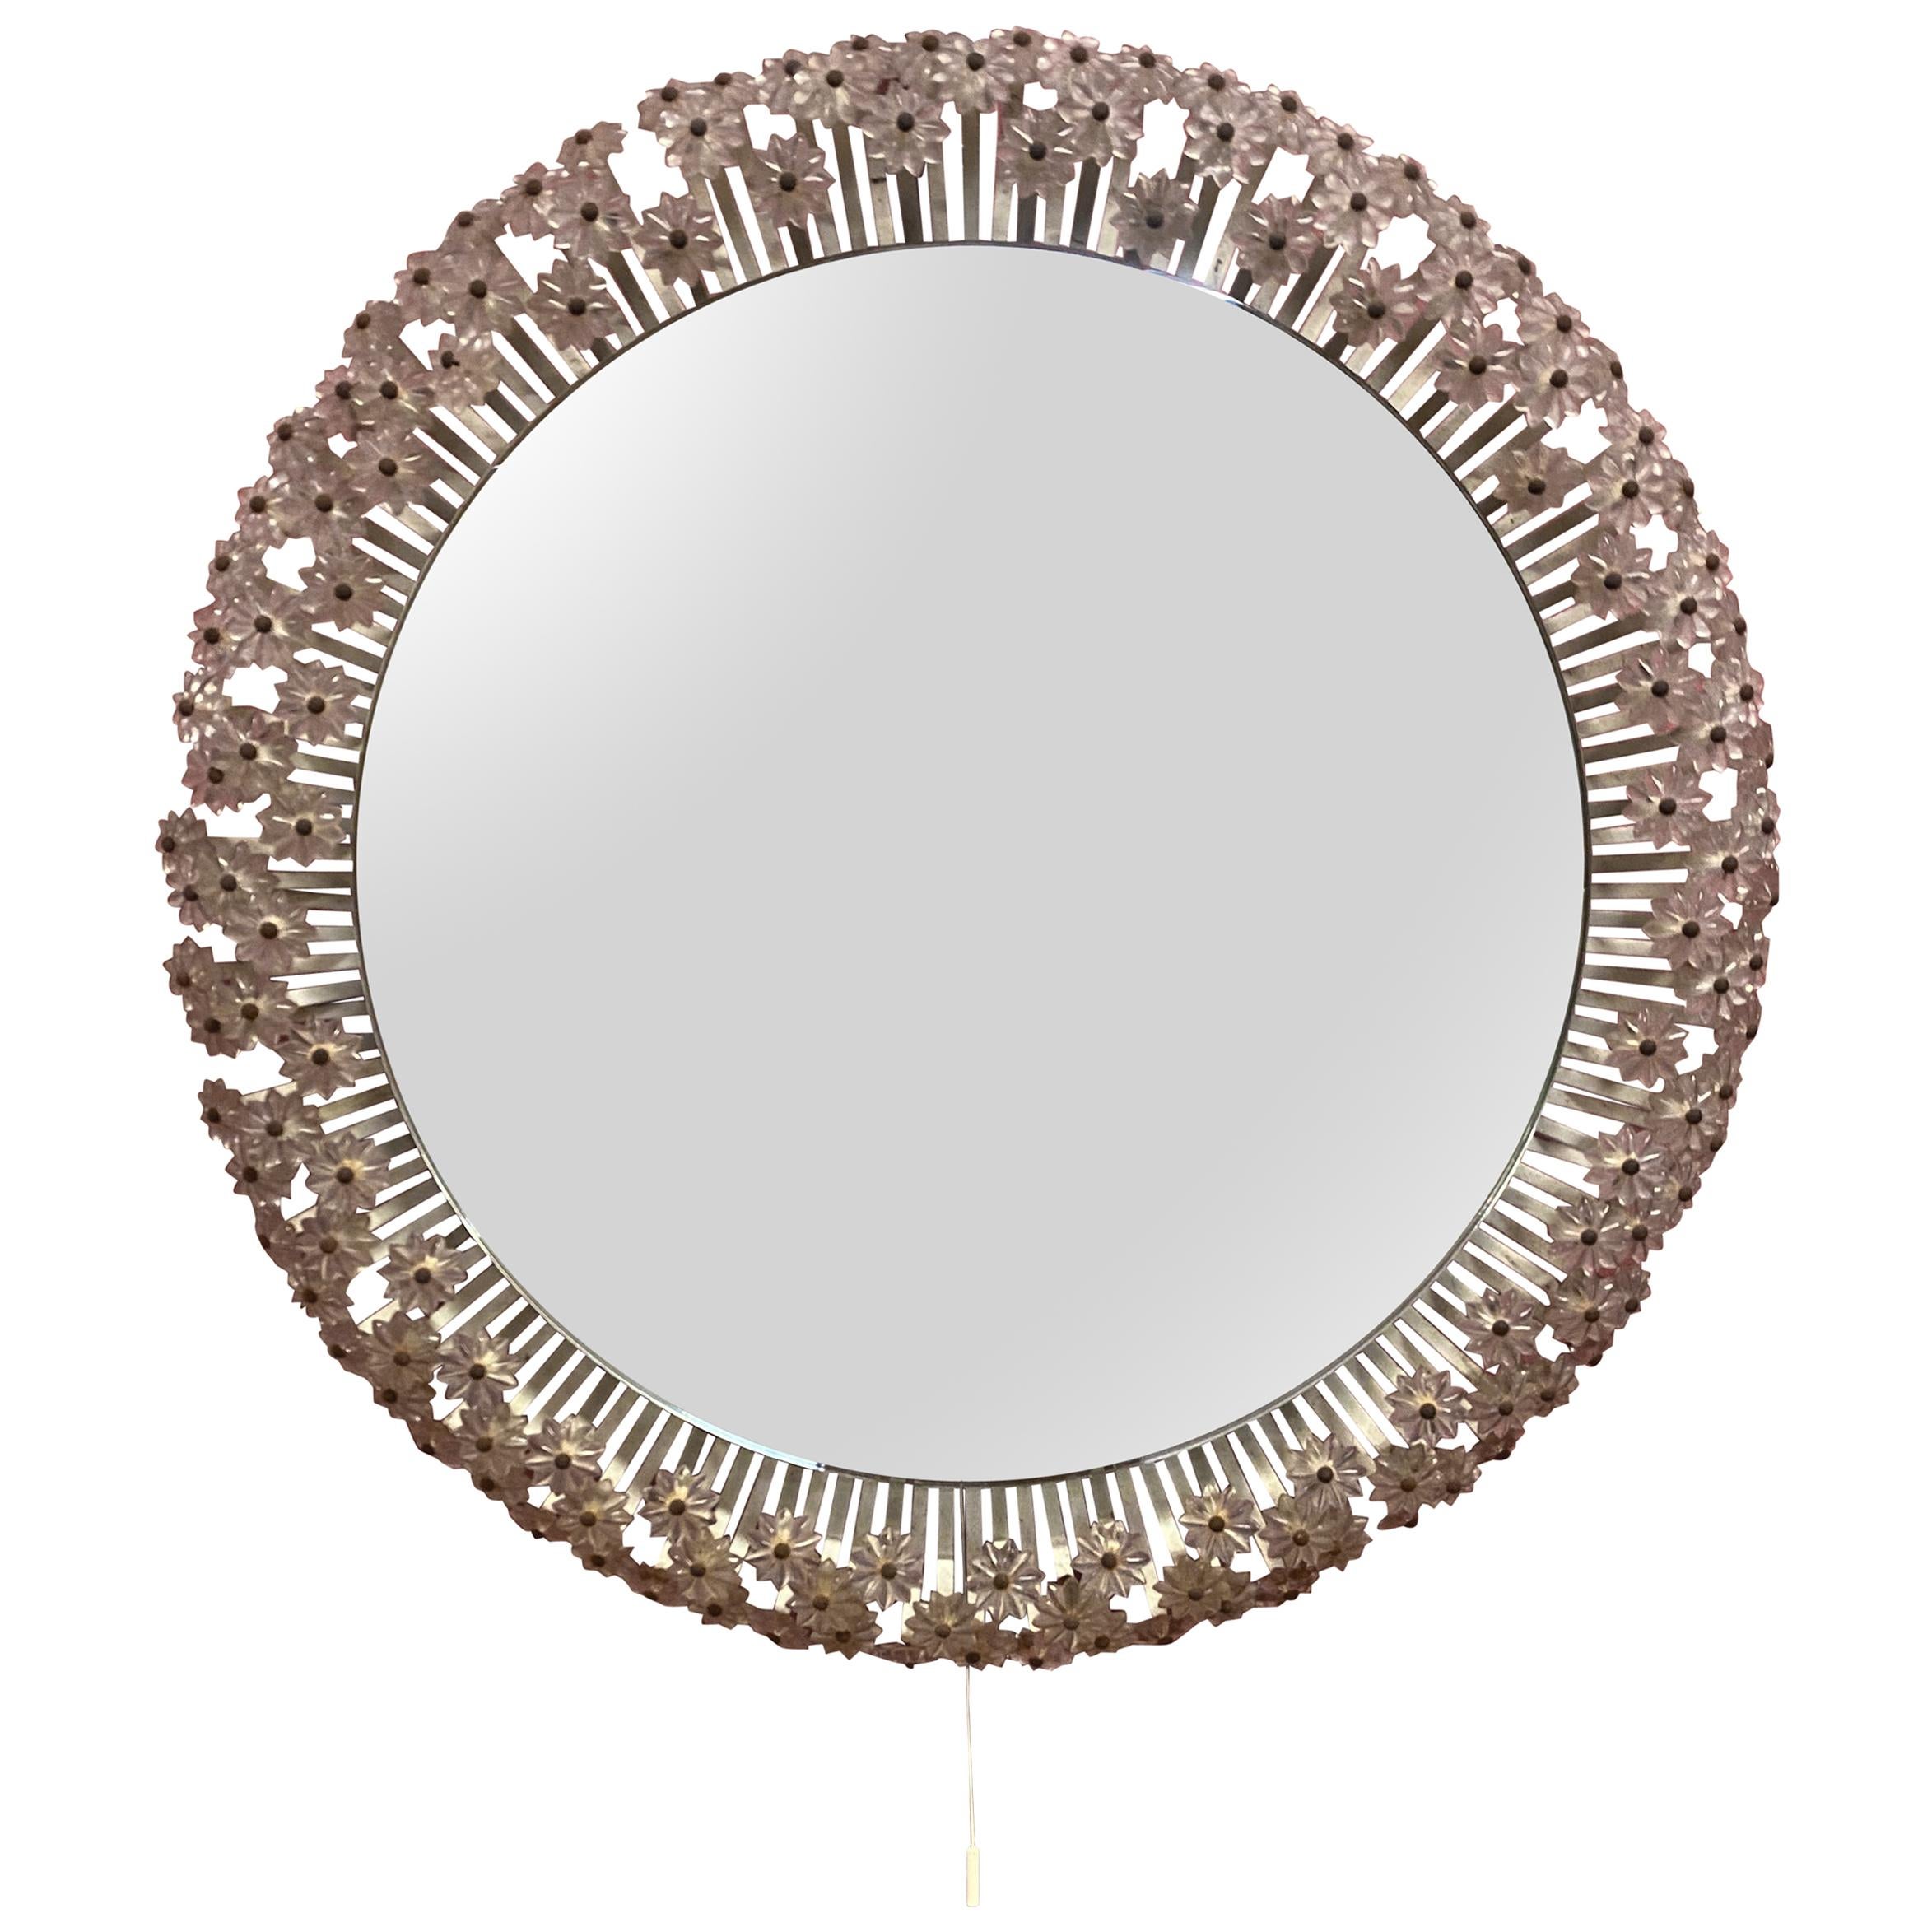 Illuminated Mirror with Floral Frame by Emil Stejnar